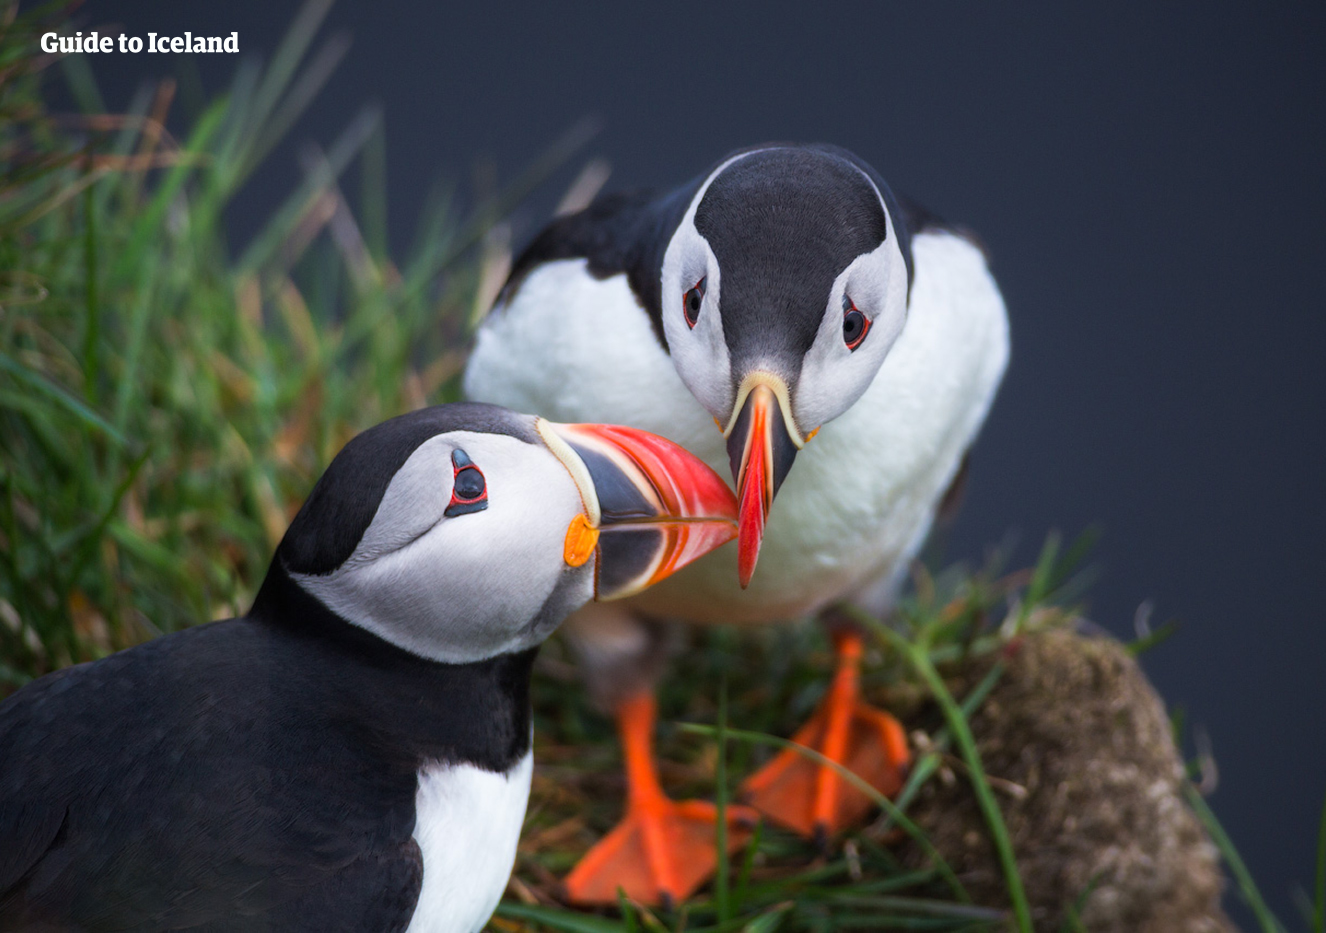 Puffins are only one of the many bird species that call Melrakkaey home.